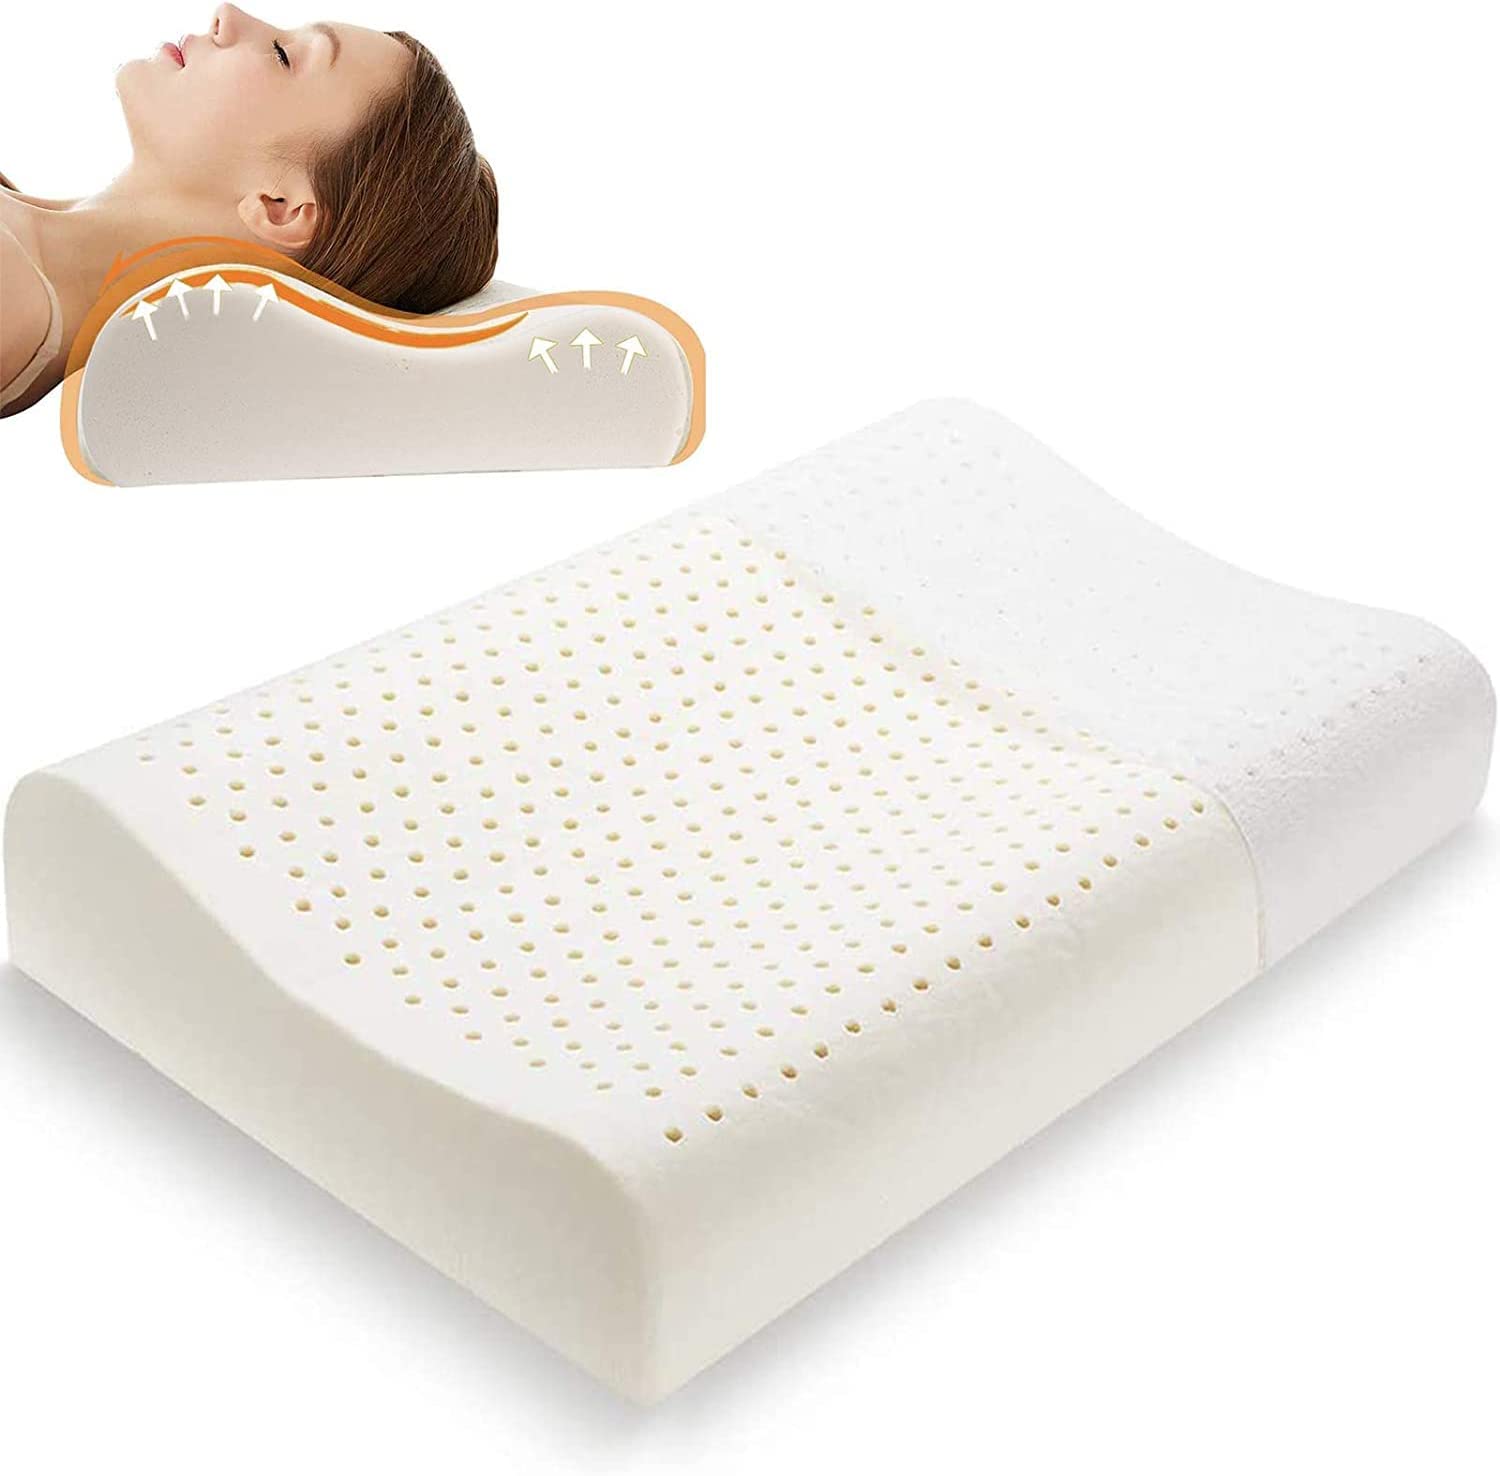 Natural Talalay Latex Foam Pillow, Cervical Pillow for Neck Pain, Contour Pillow, Pillow for Neck and Shoulder Pain, Neck Pain Pillow, Side Sleeper Pillow for Shoulder Pain, Side Sleeping Pillow